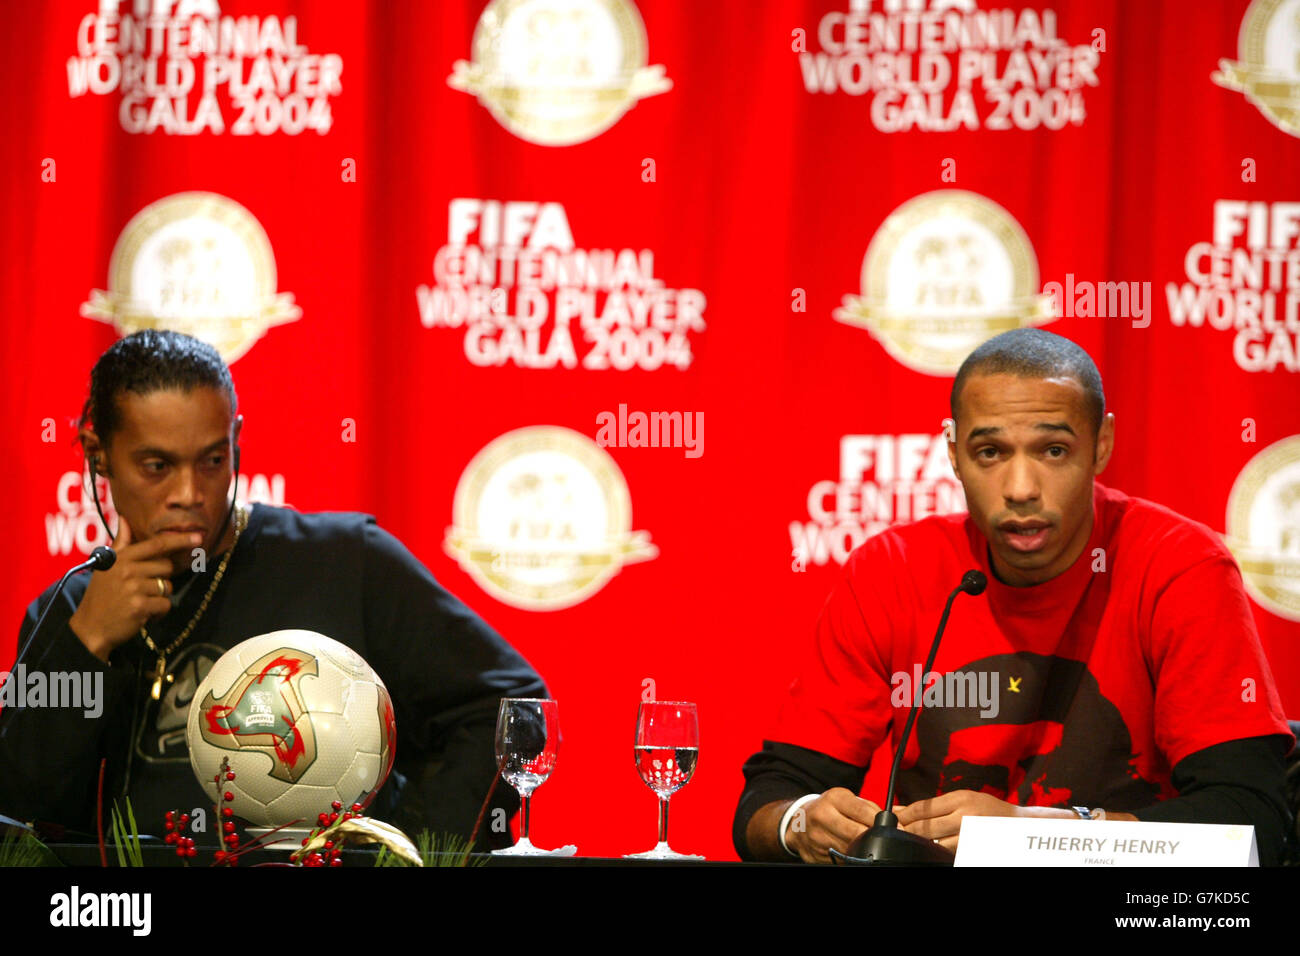 Soccer - FIFA World Player Gala 2004. France and Arsenal's Thierry Henry answers questions at the press conference as Brazil and Barcelona's Ronaldinho looks on Stock Photo